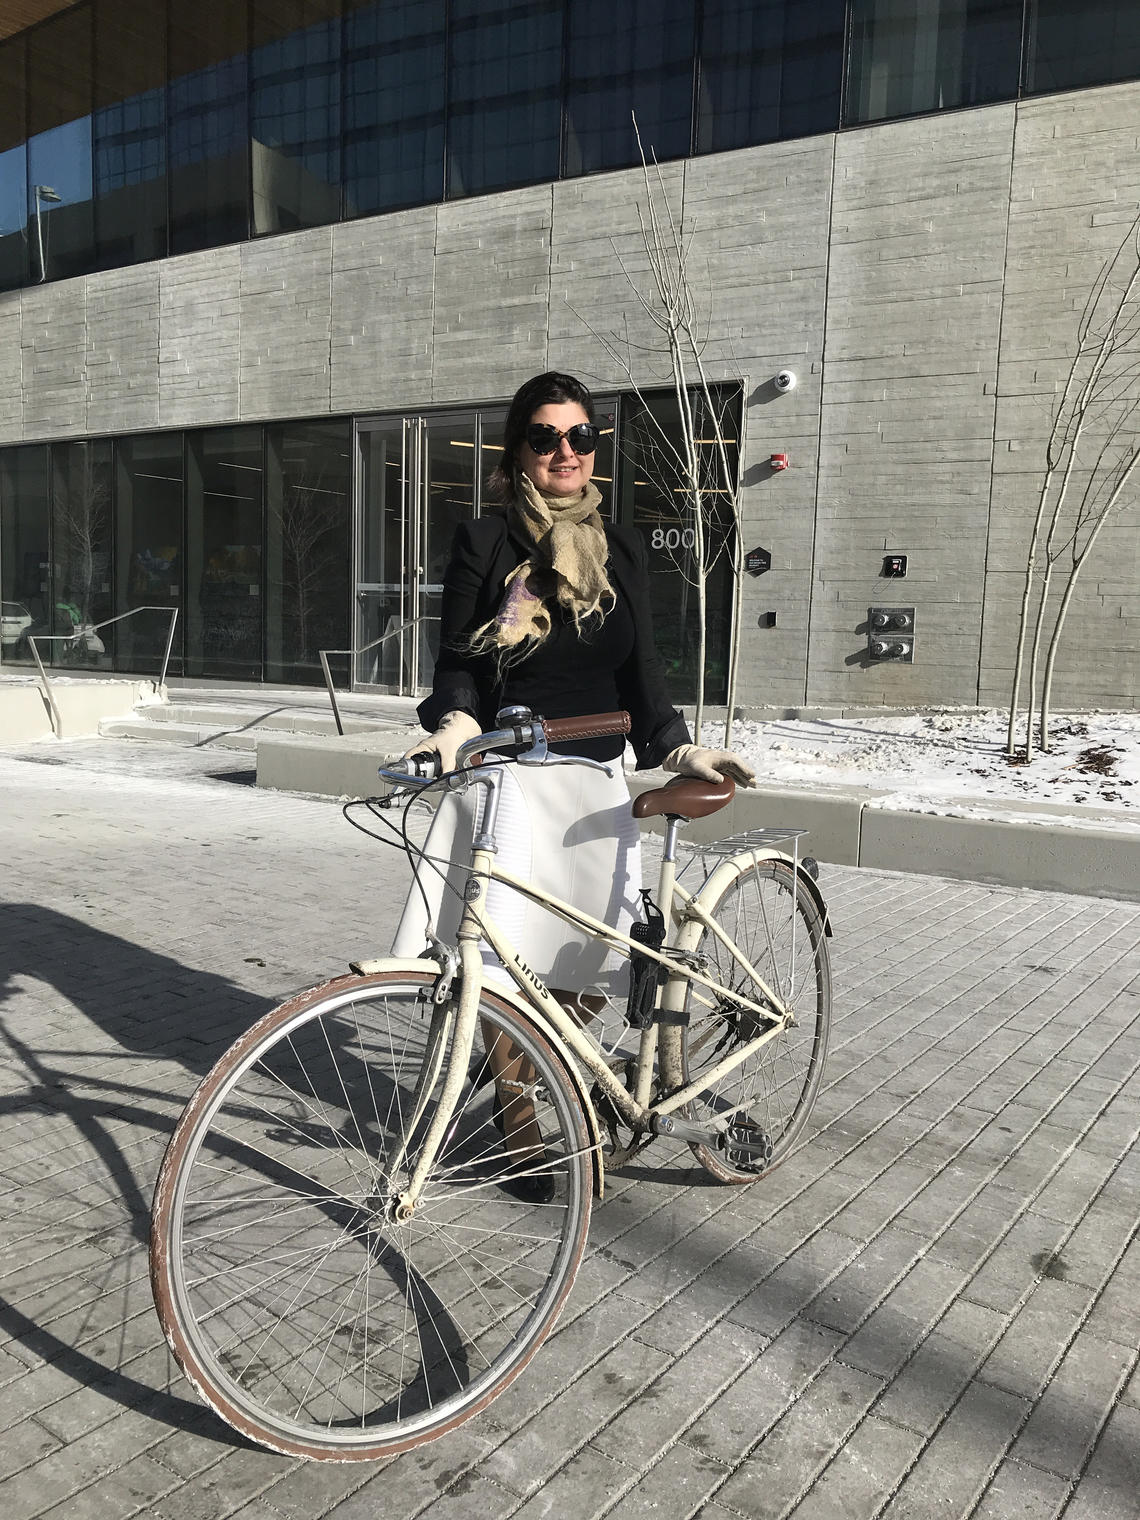 Farnaz Sadeghpour, associate professor in the Schulich School of Engineering, is leading a workshop on winter cycling research collaborations in Canada at the 2019 Winter Cycling Congress.